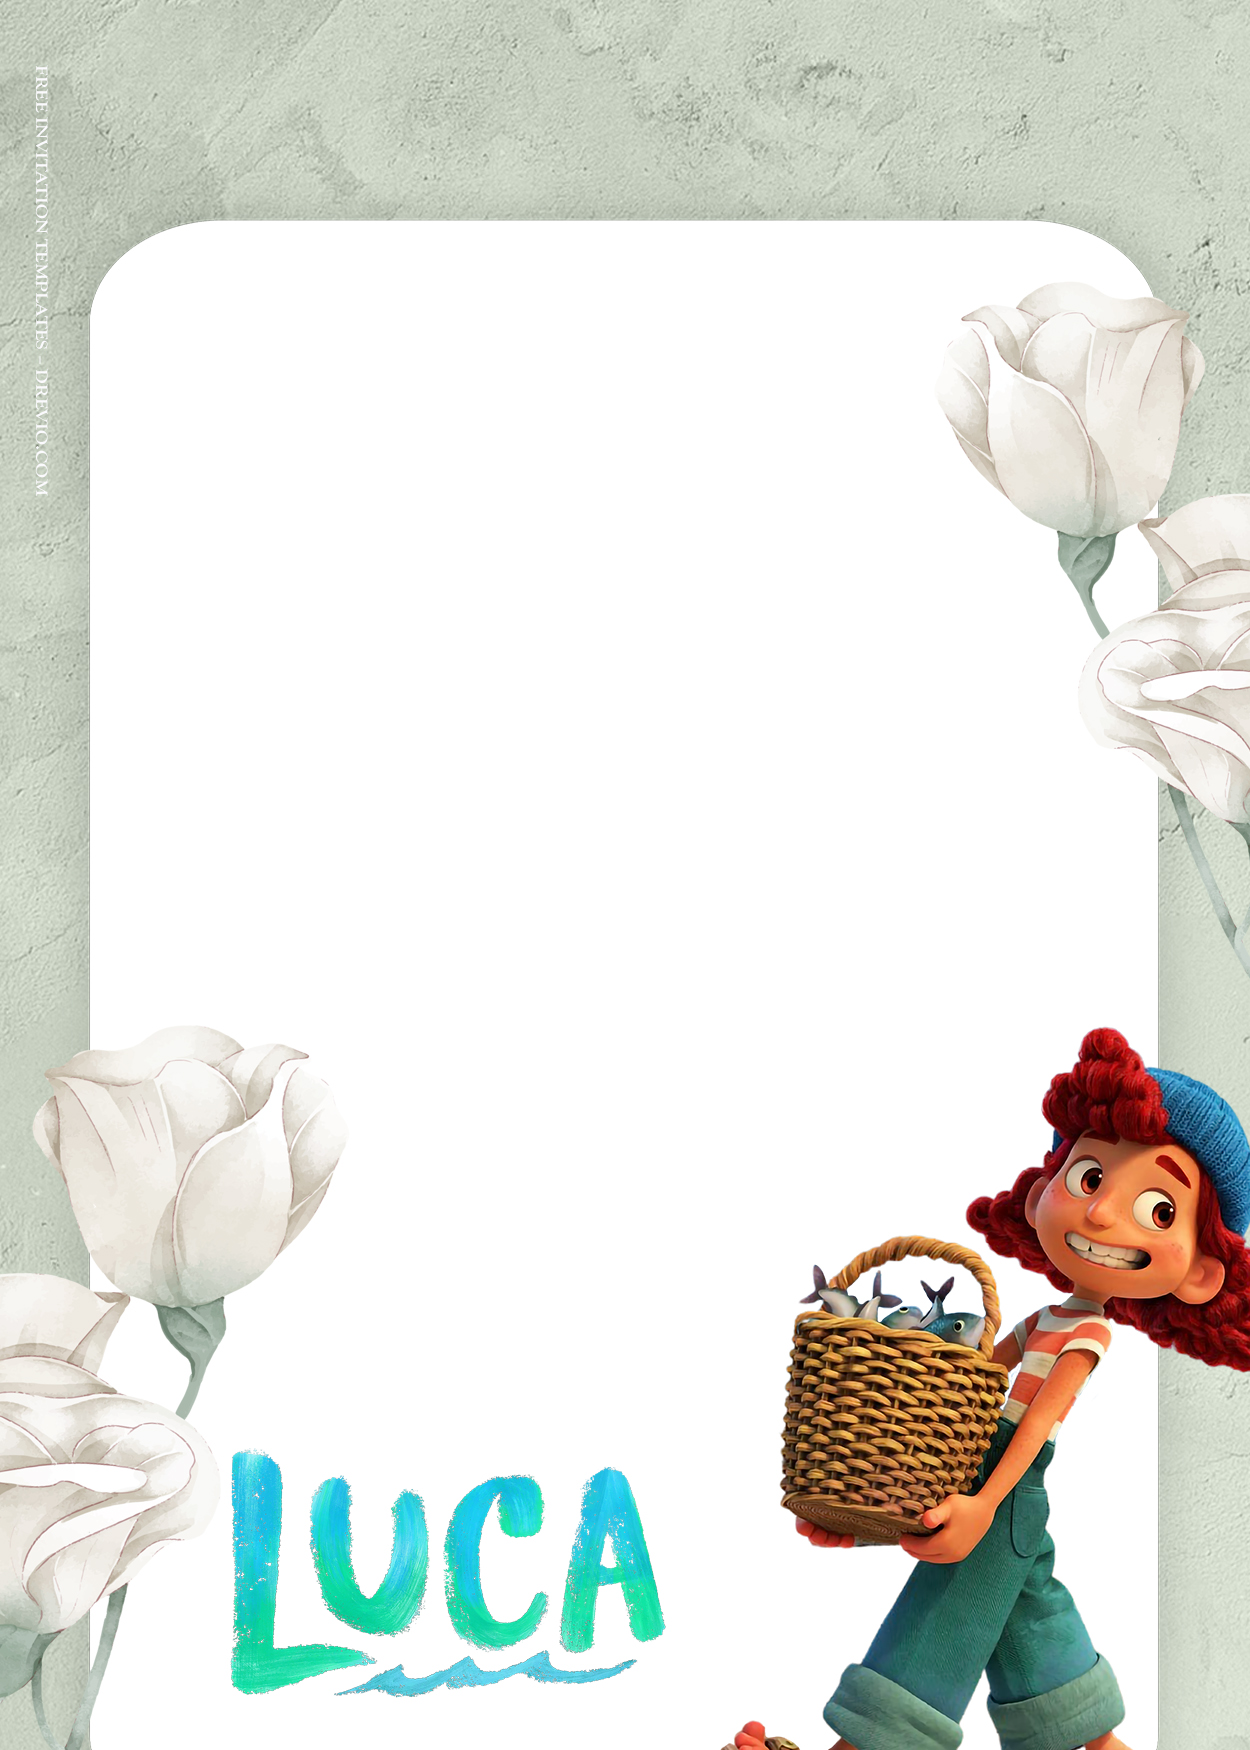 8+ Under Water Blossom With Luca Birthday Invitation Templates One